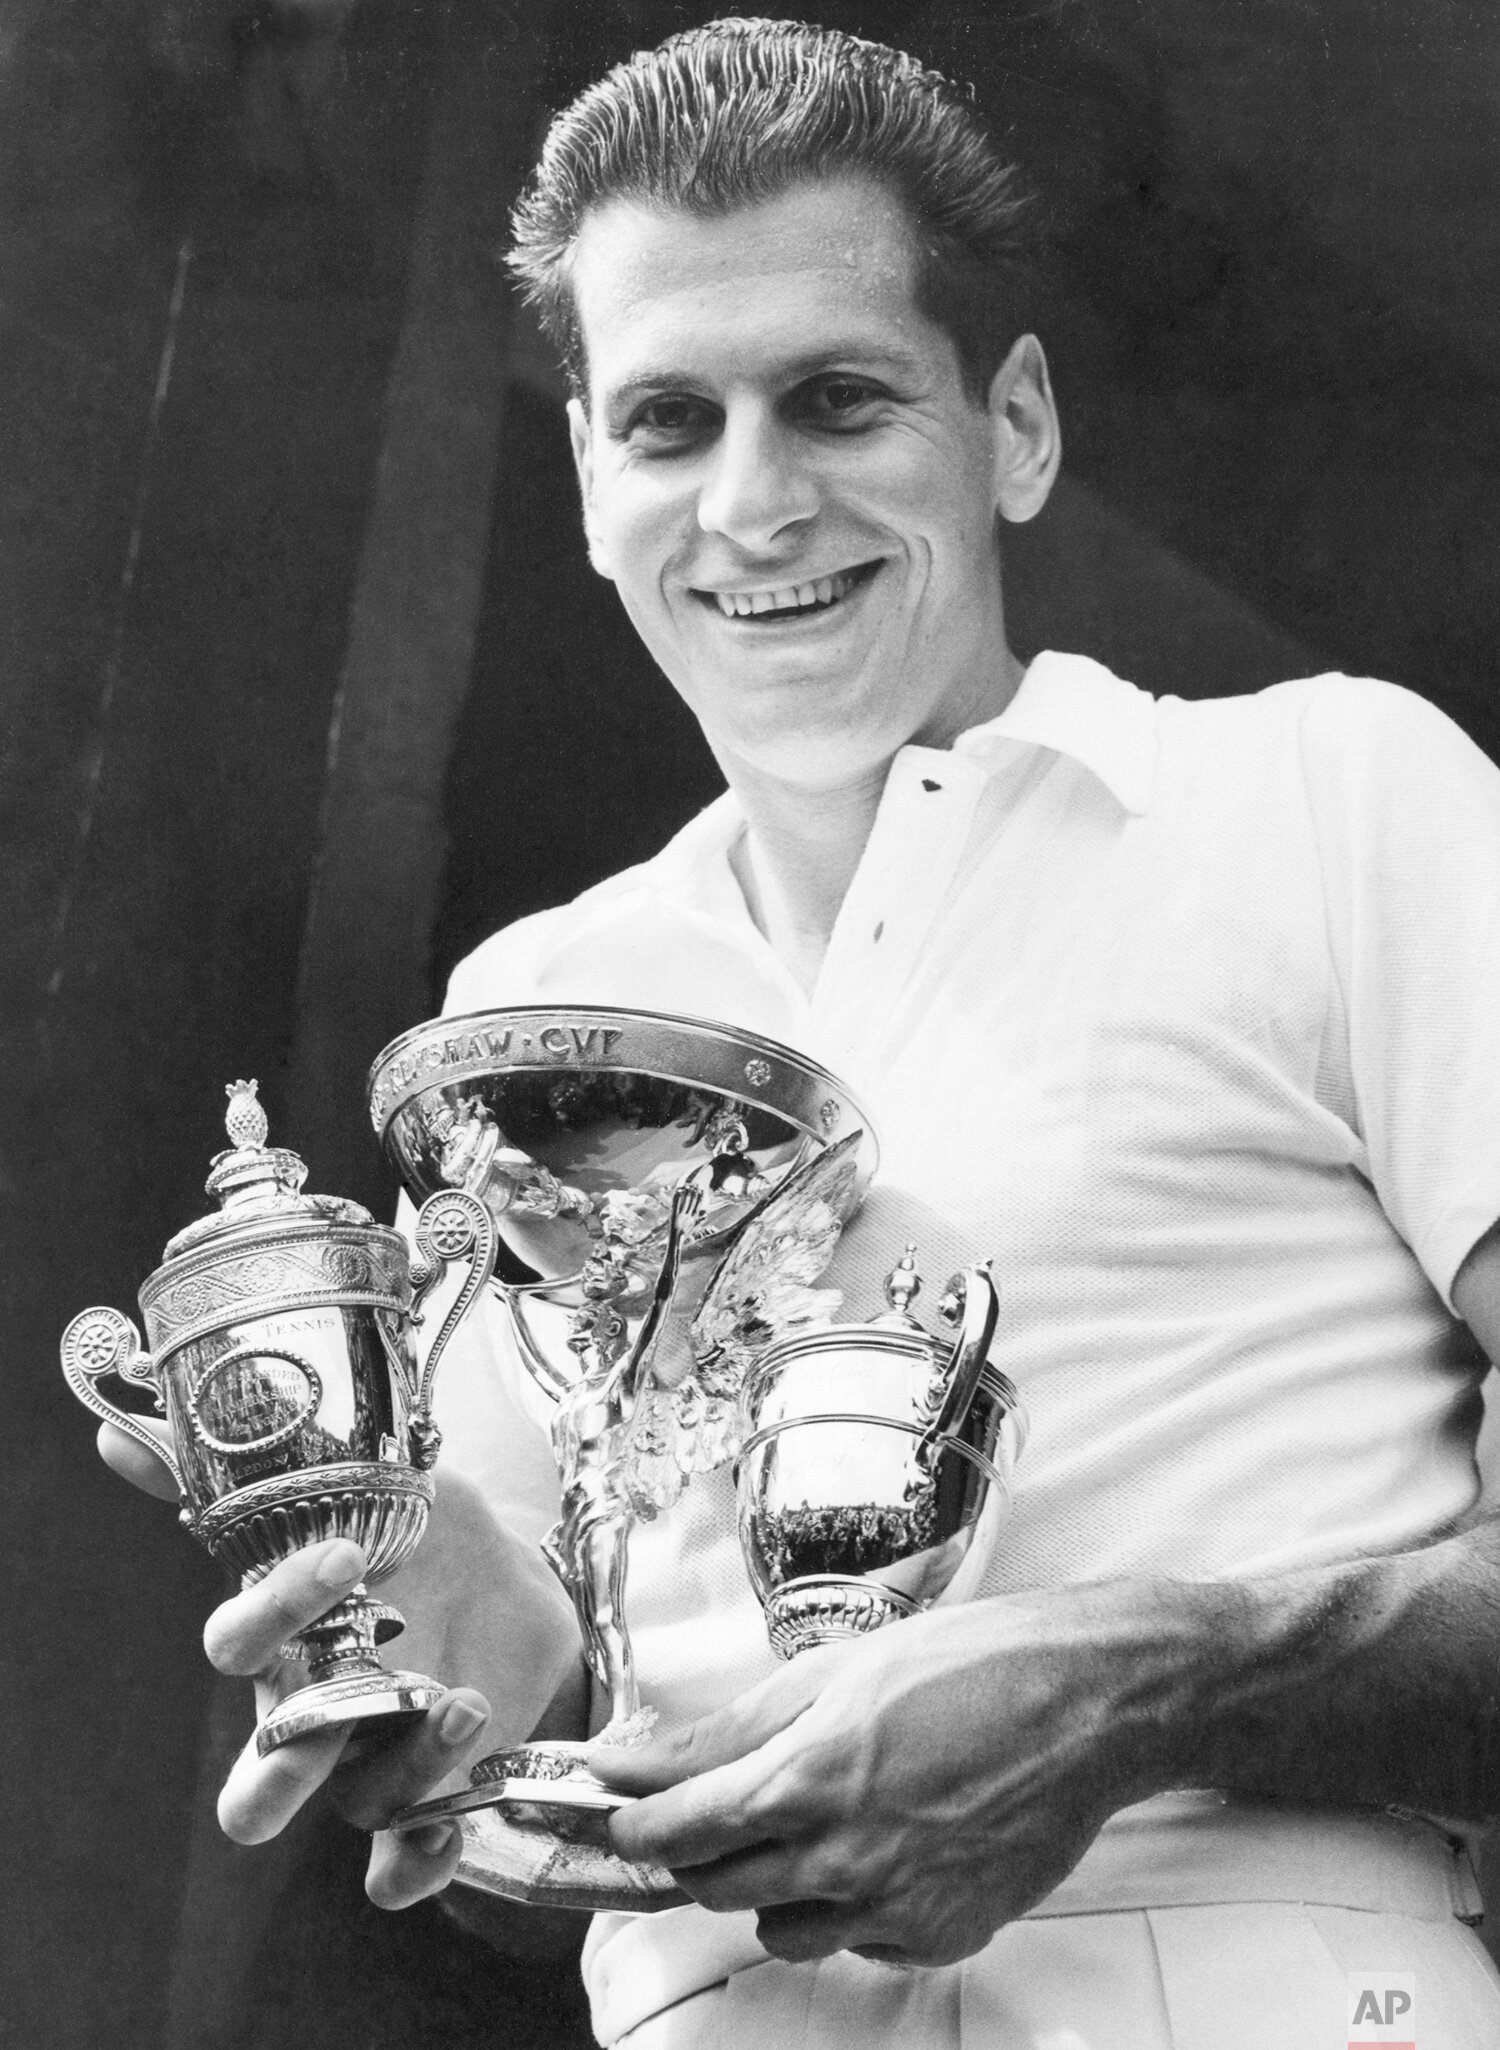  Dick Savitt of Orange, New Jersey, holds the three cups presented to him after winning the men's singles title at the All England Lawn Tennis Championships in Wimbledon on July 6, 1951. He beat Australia's Ken McGregor, unseen, 6-4, 6-4, 6-4 in the 